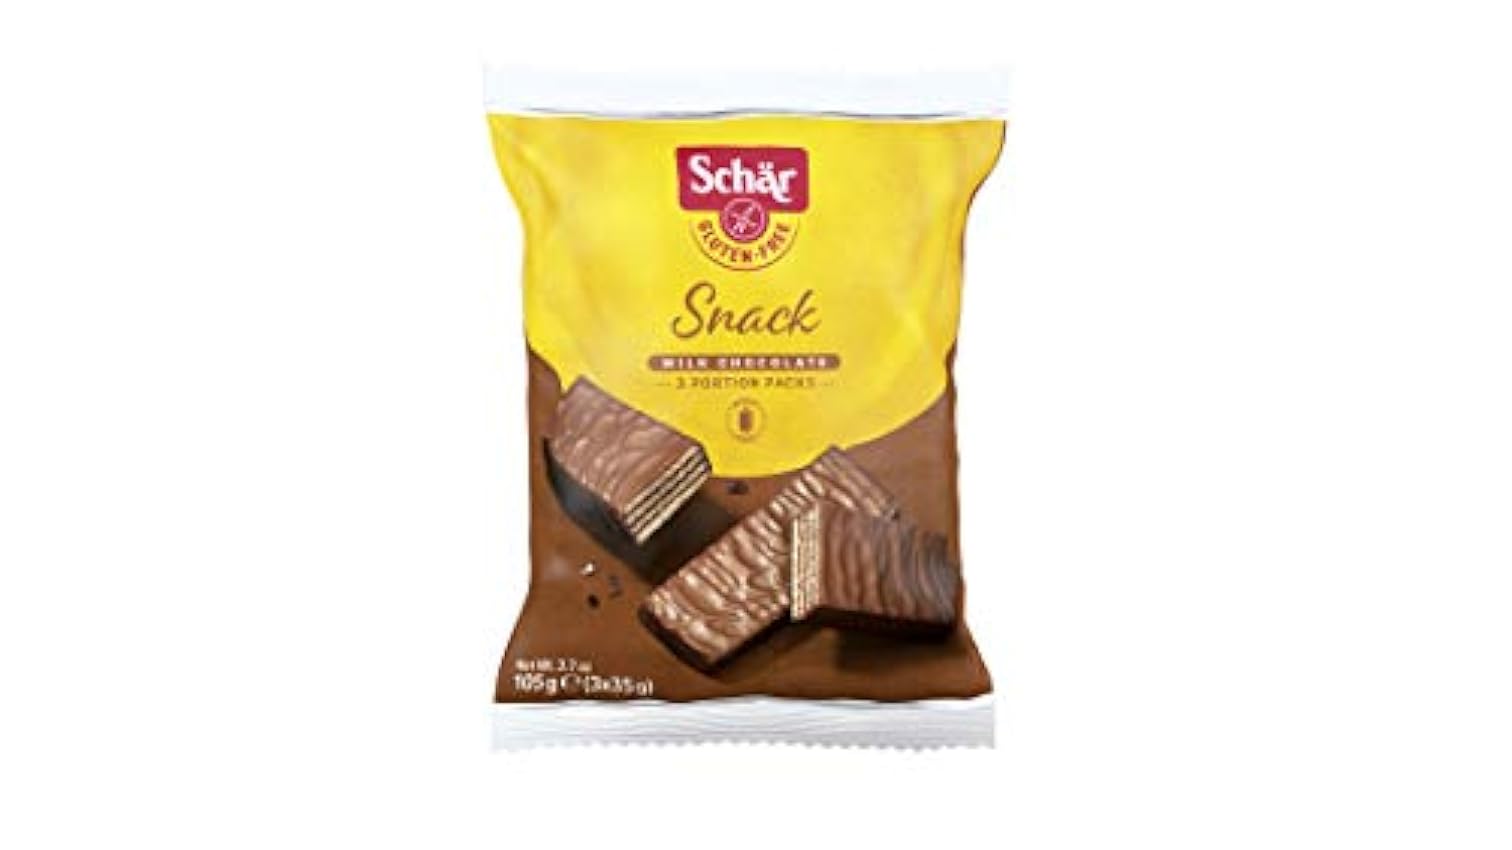 Schär Snack (1 x 105 g) Gluten-, Wheat- and Lactose-Fre